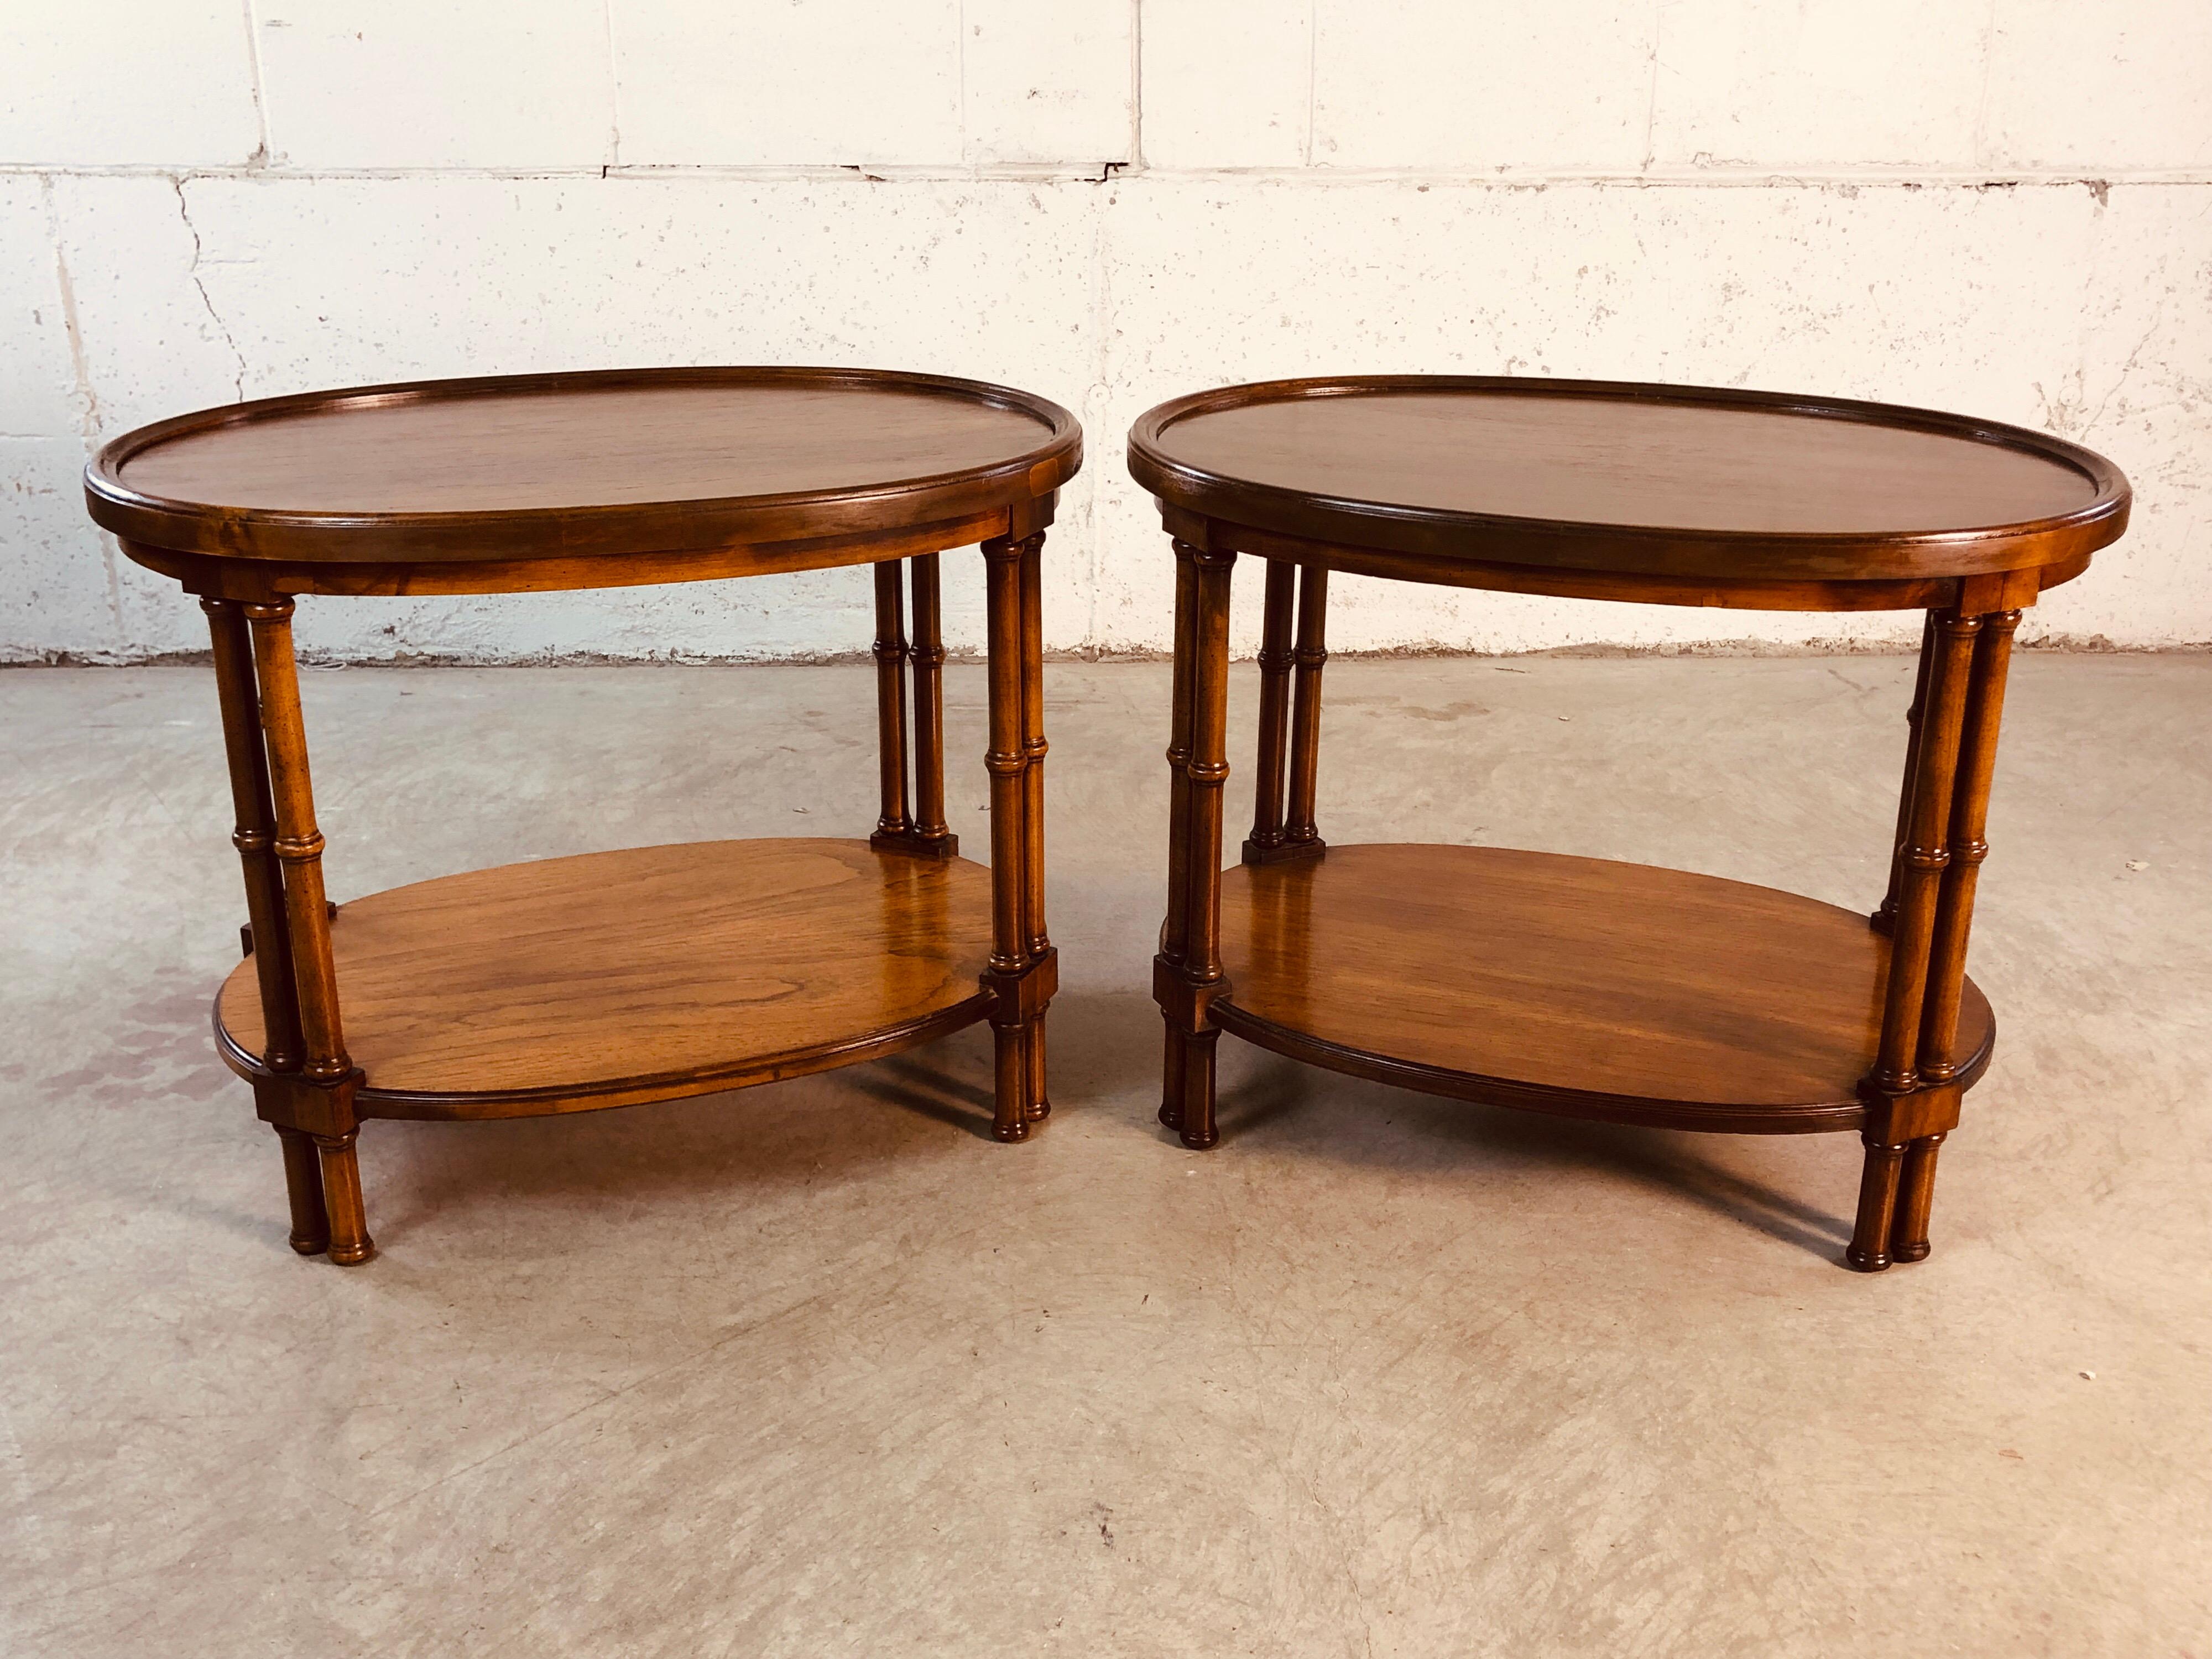 Vintage 1960s pair of Brandt Furniture mahogany oval bamboo style side tables. The tables have an additional shelf for storage. They have been completely restored and refinished. Marked underneath.